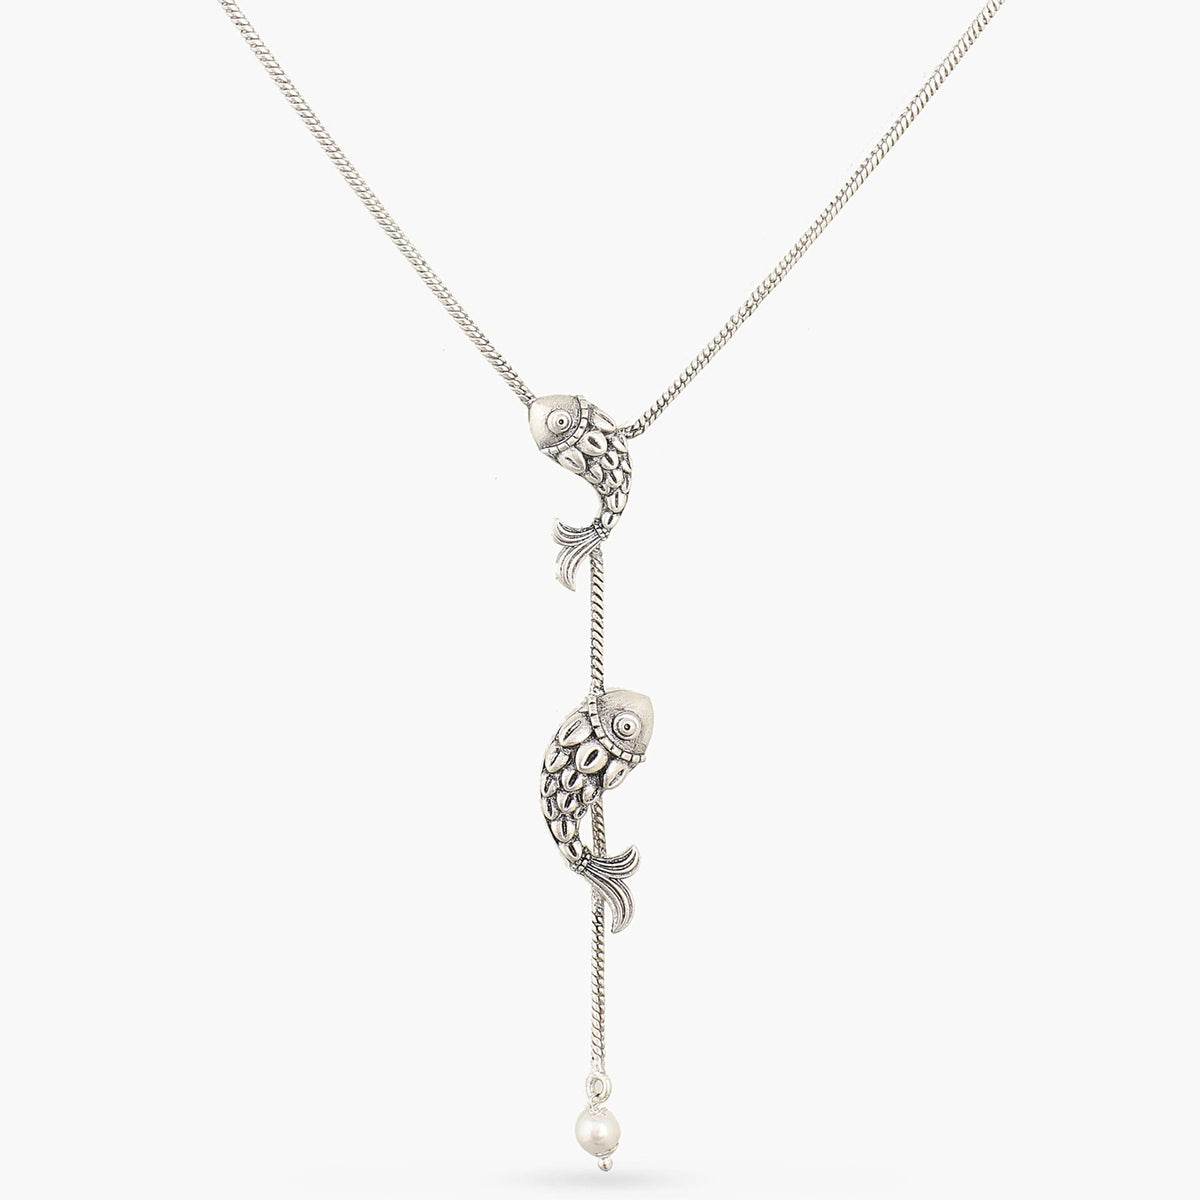 Dual Fish Oxidized Chain Necklace